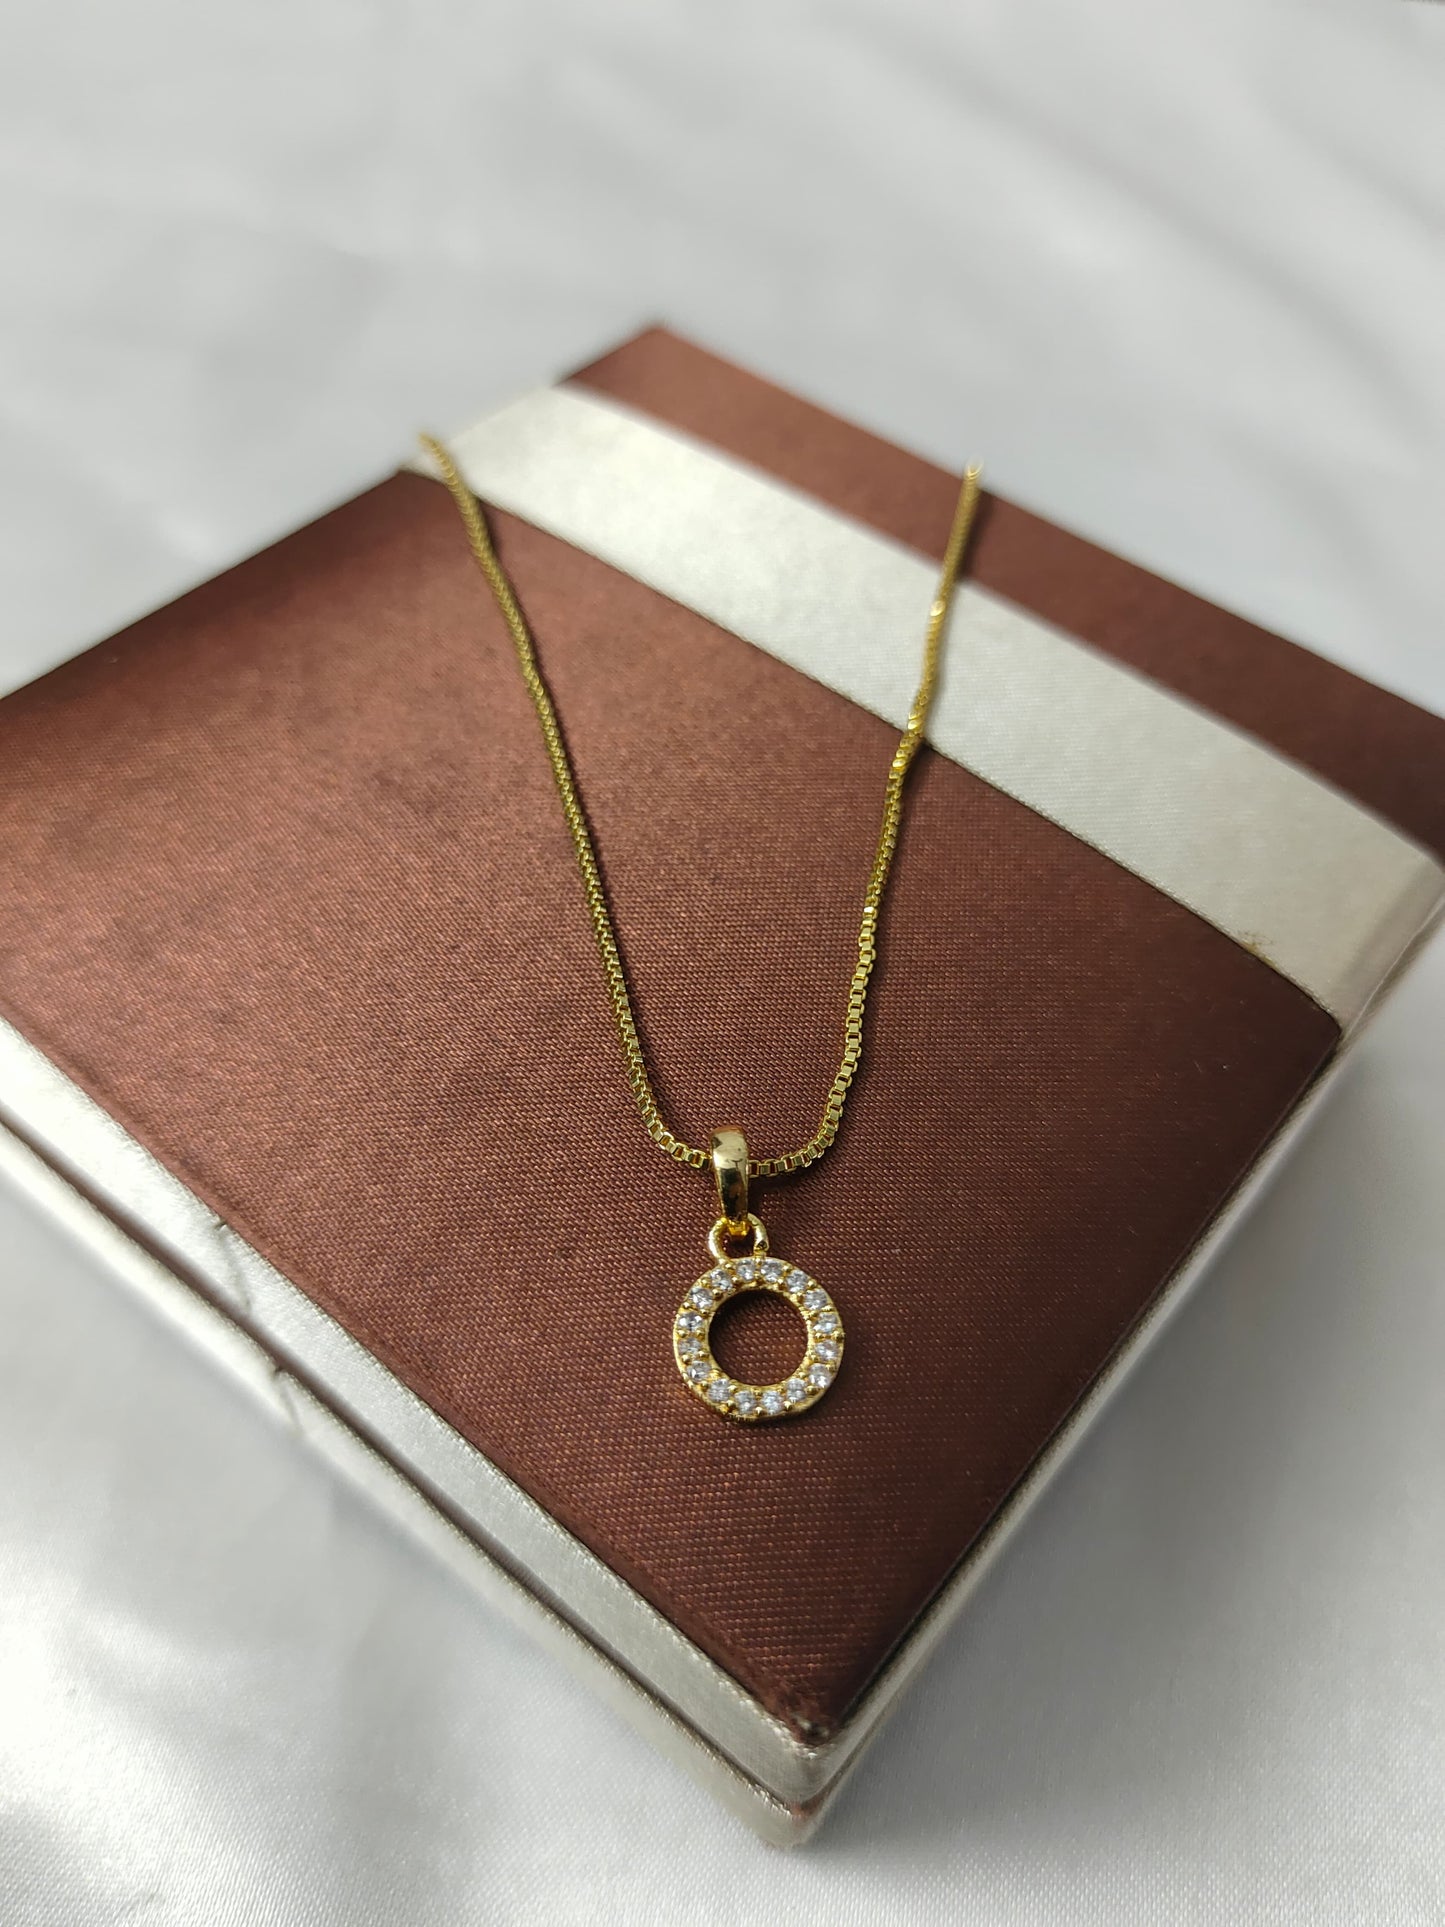 Itscustommade Gold Plated Chain With Small stone pendant